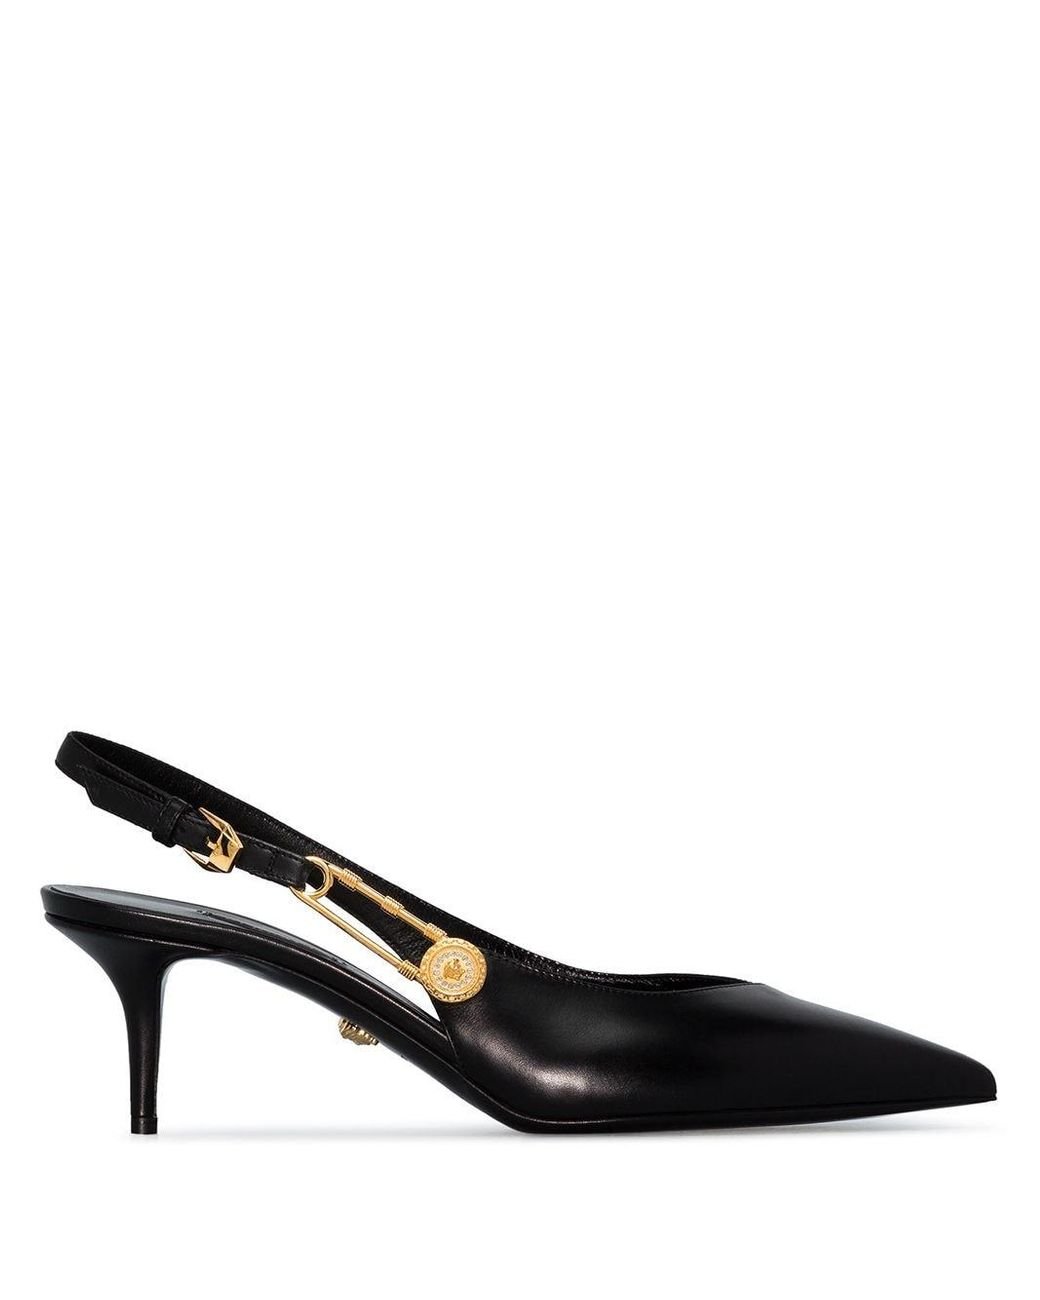 Versace 55mm Safety Pin Slingback Pumps in Black | Lyst